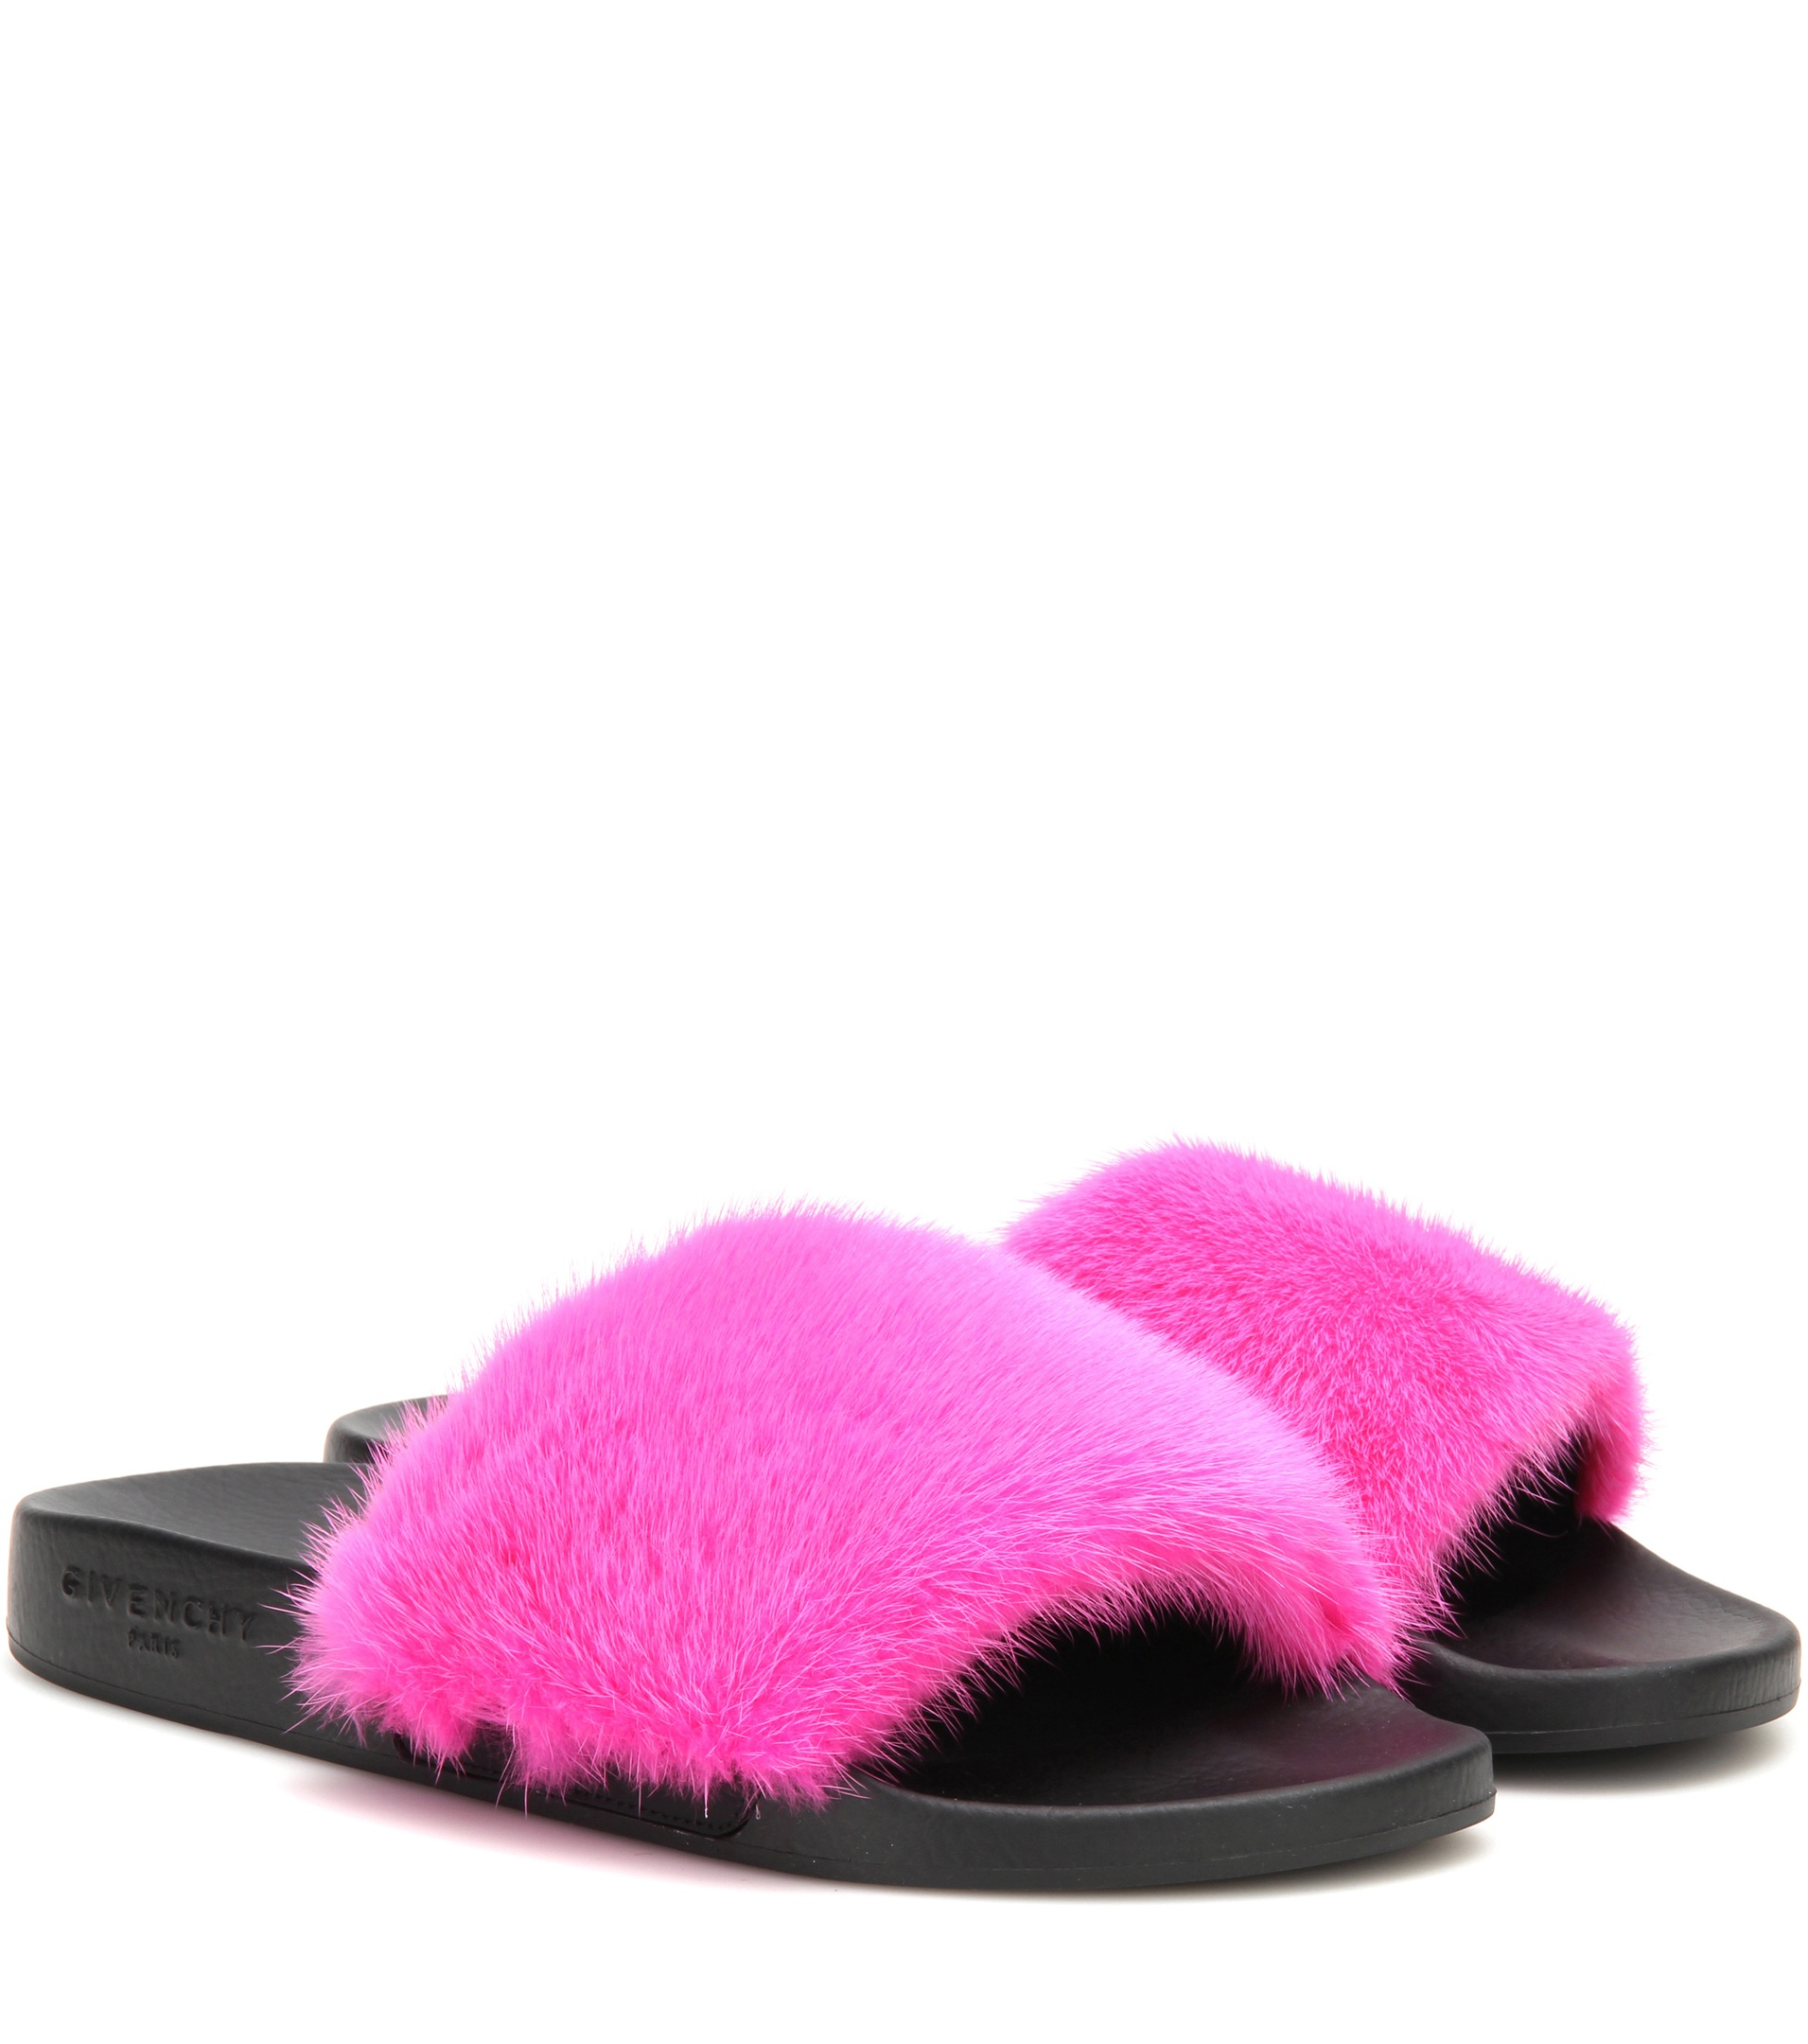 Givenchy Fur Slides in Pink - Lyst